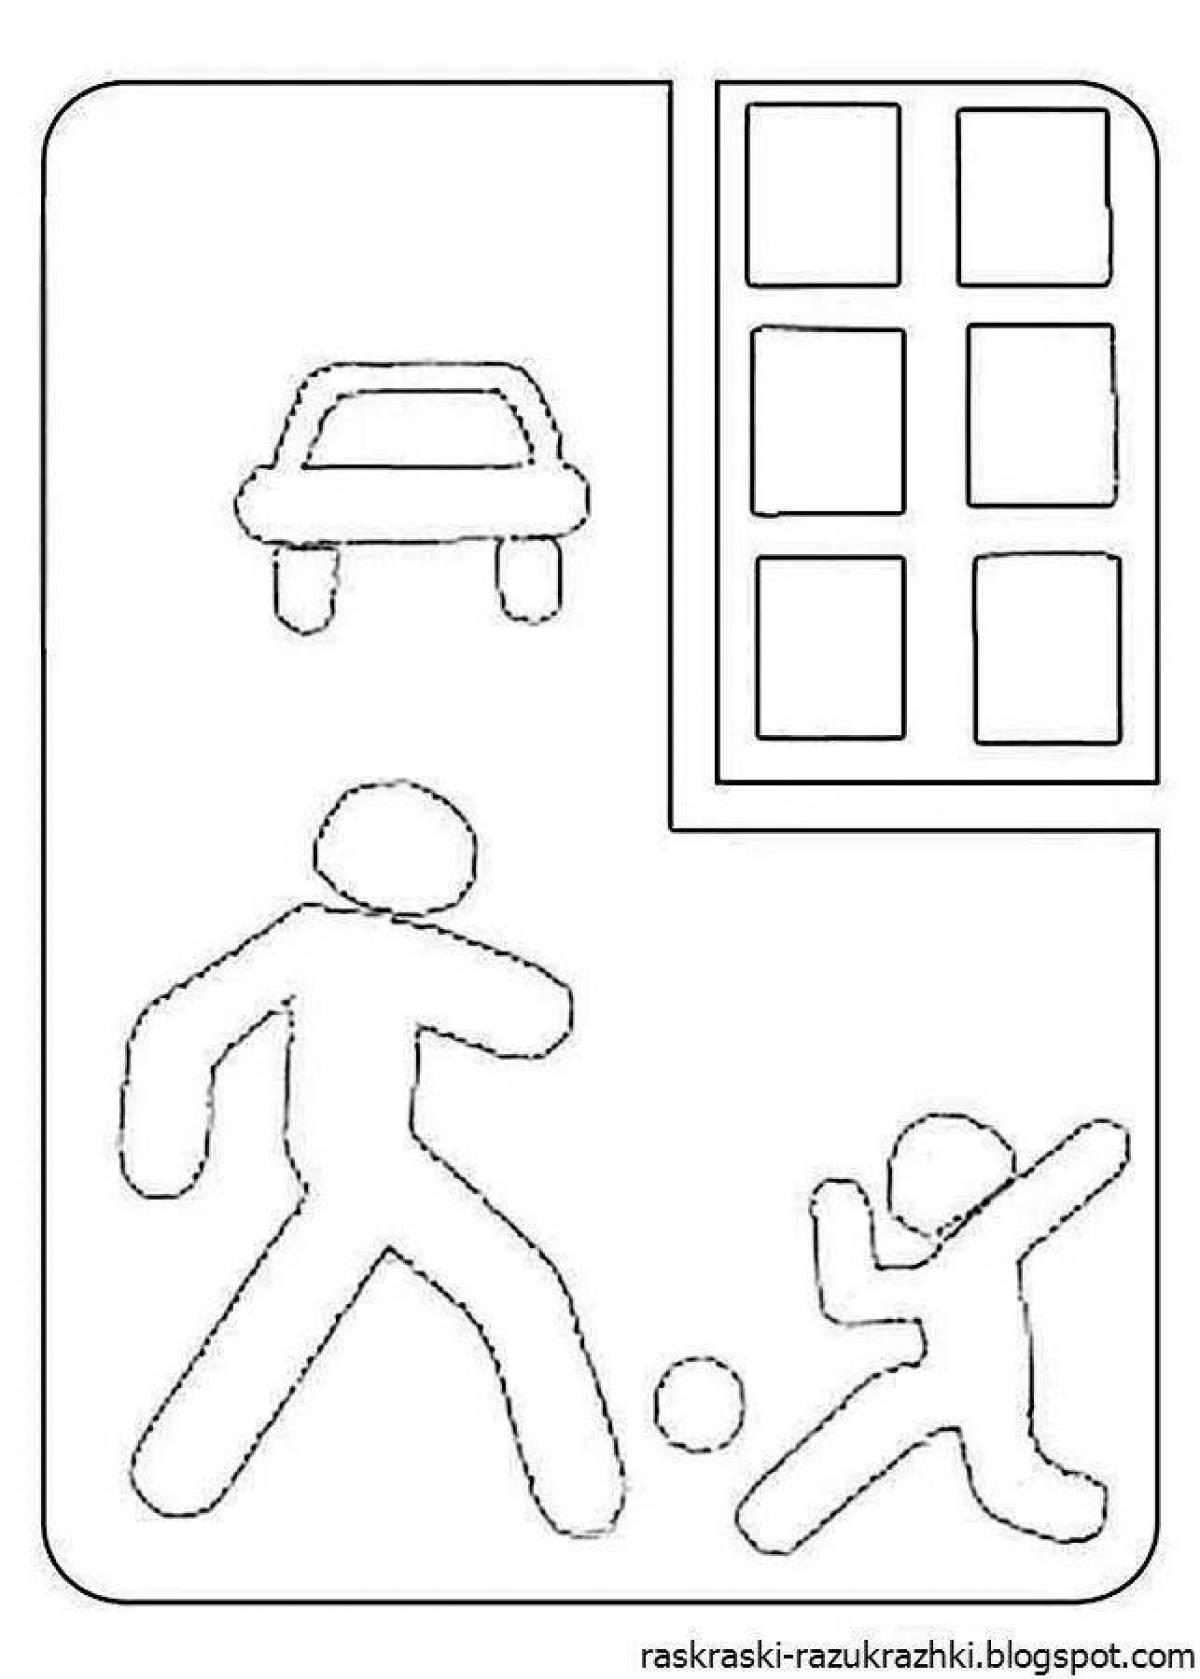 Crazy kids coloring page